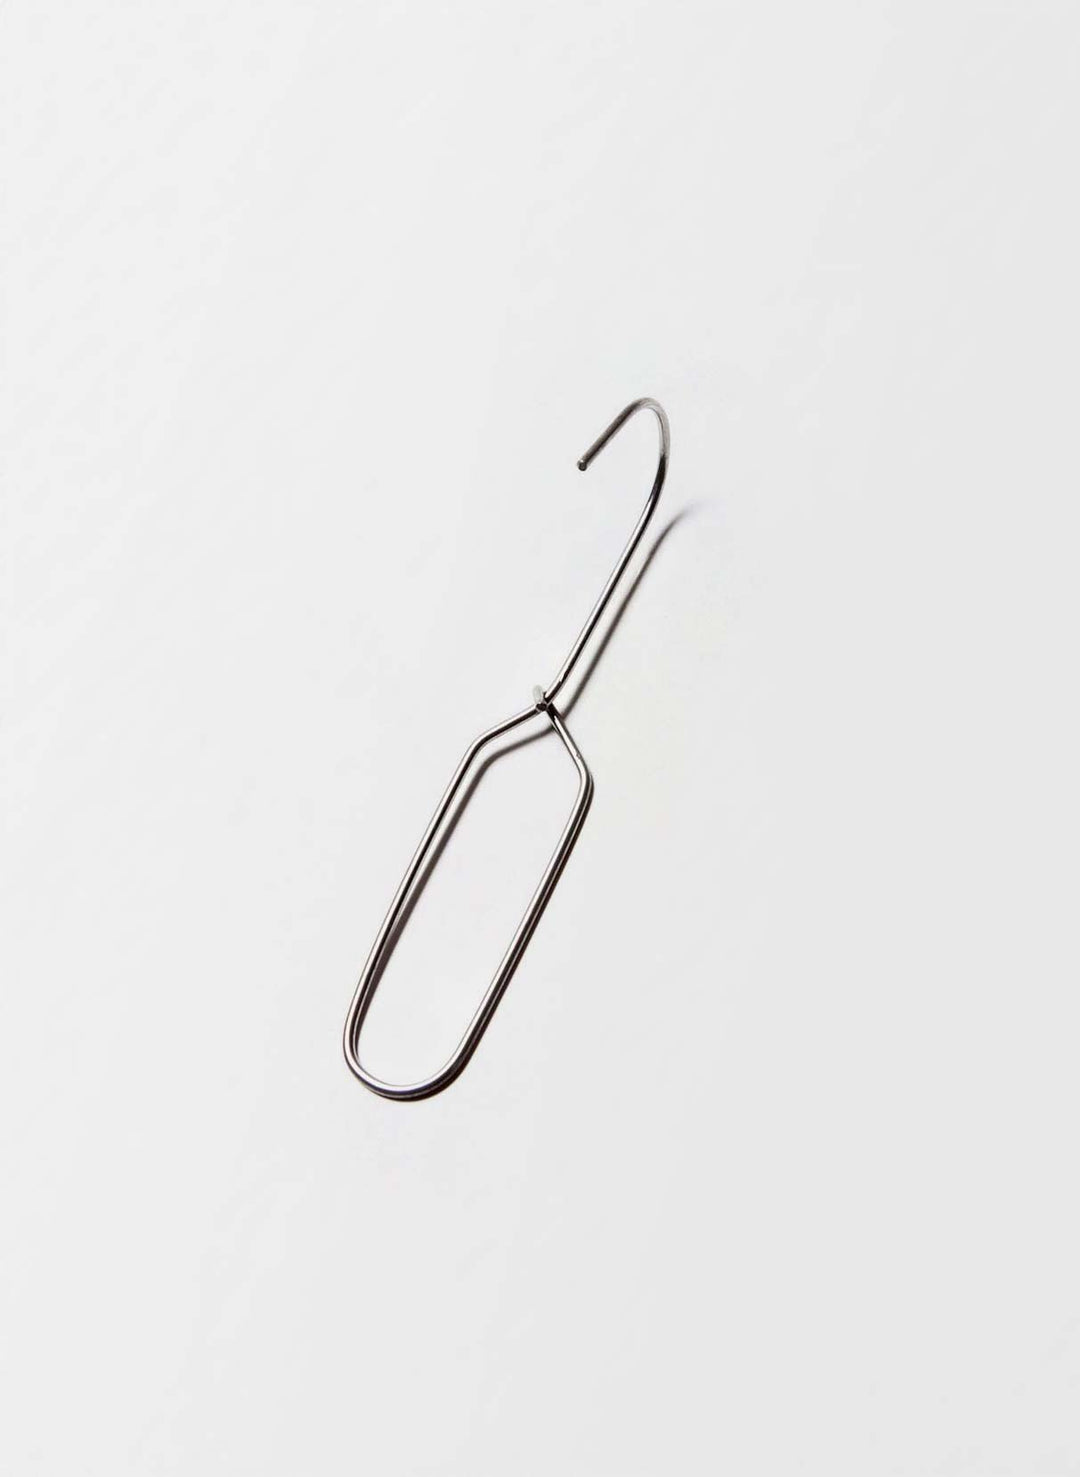 a silver hook on a white background